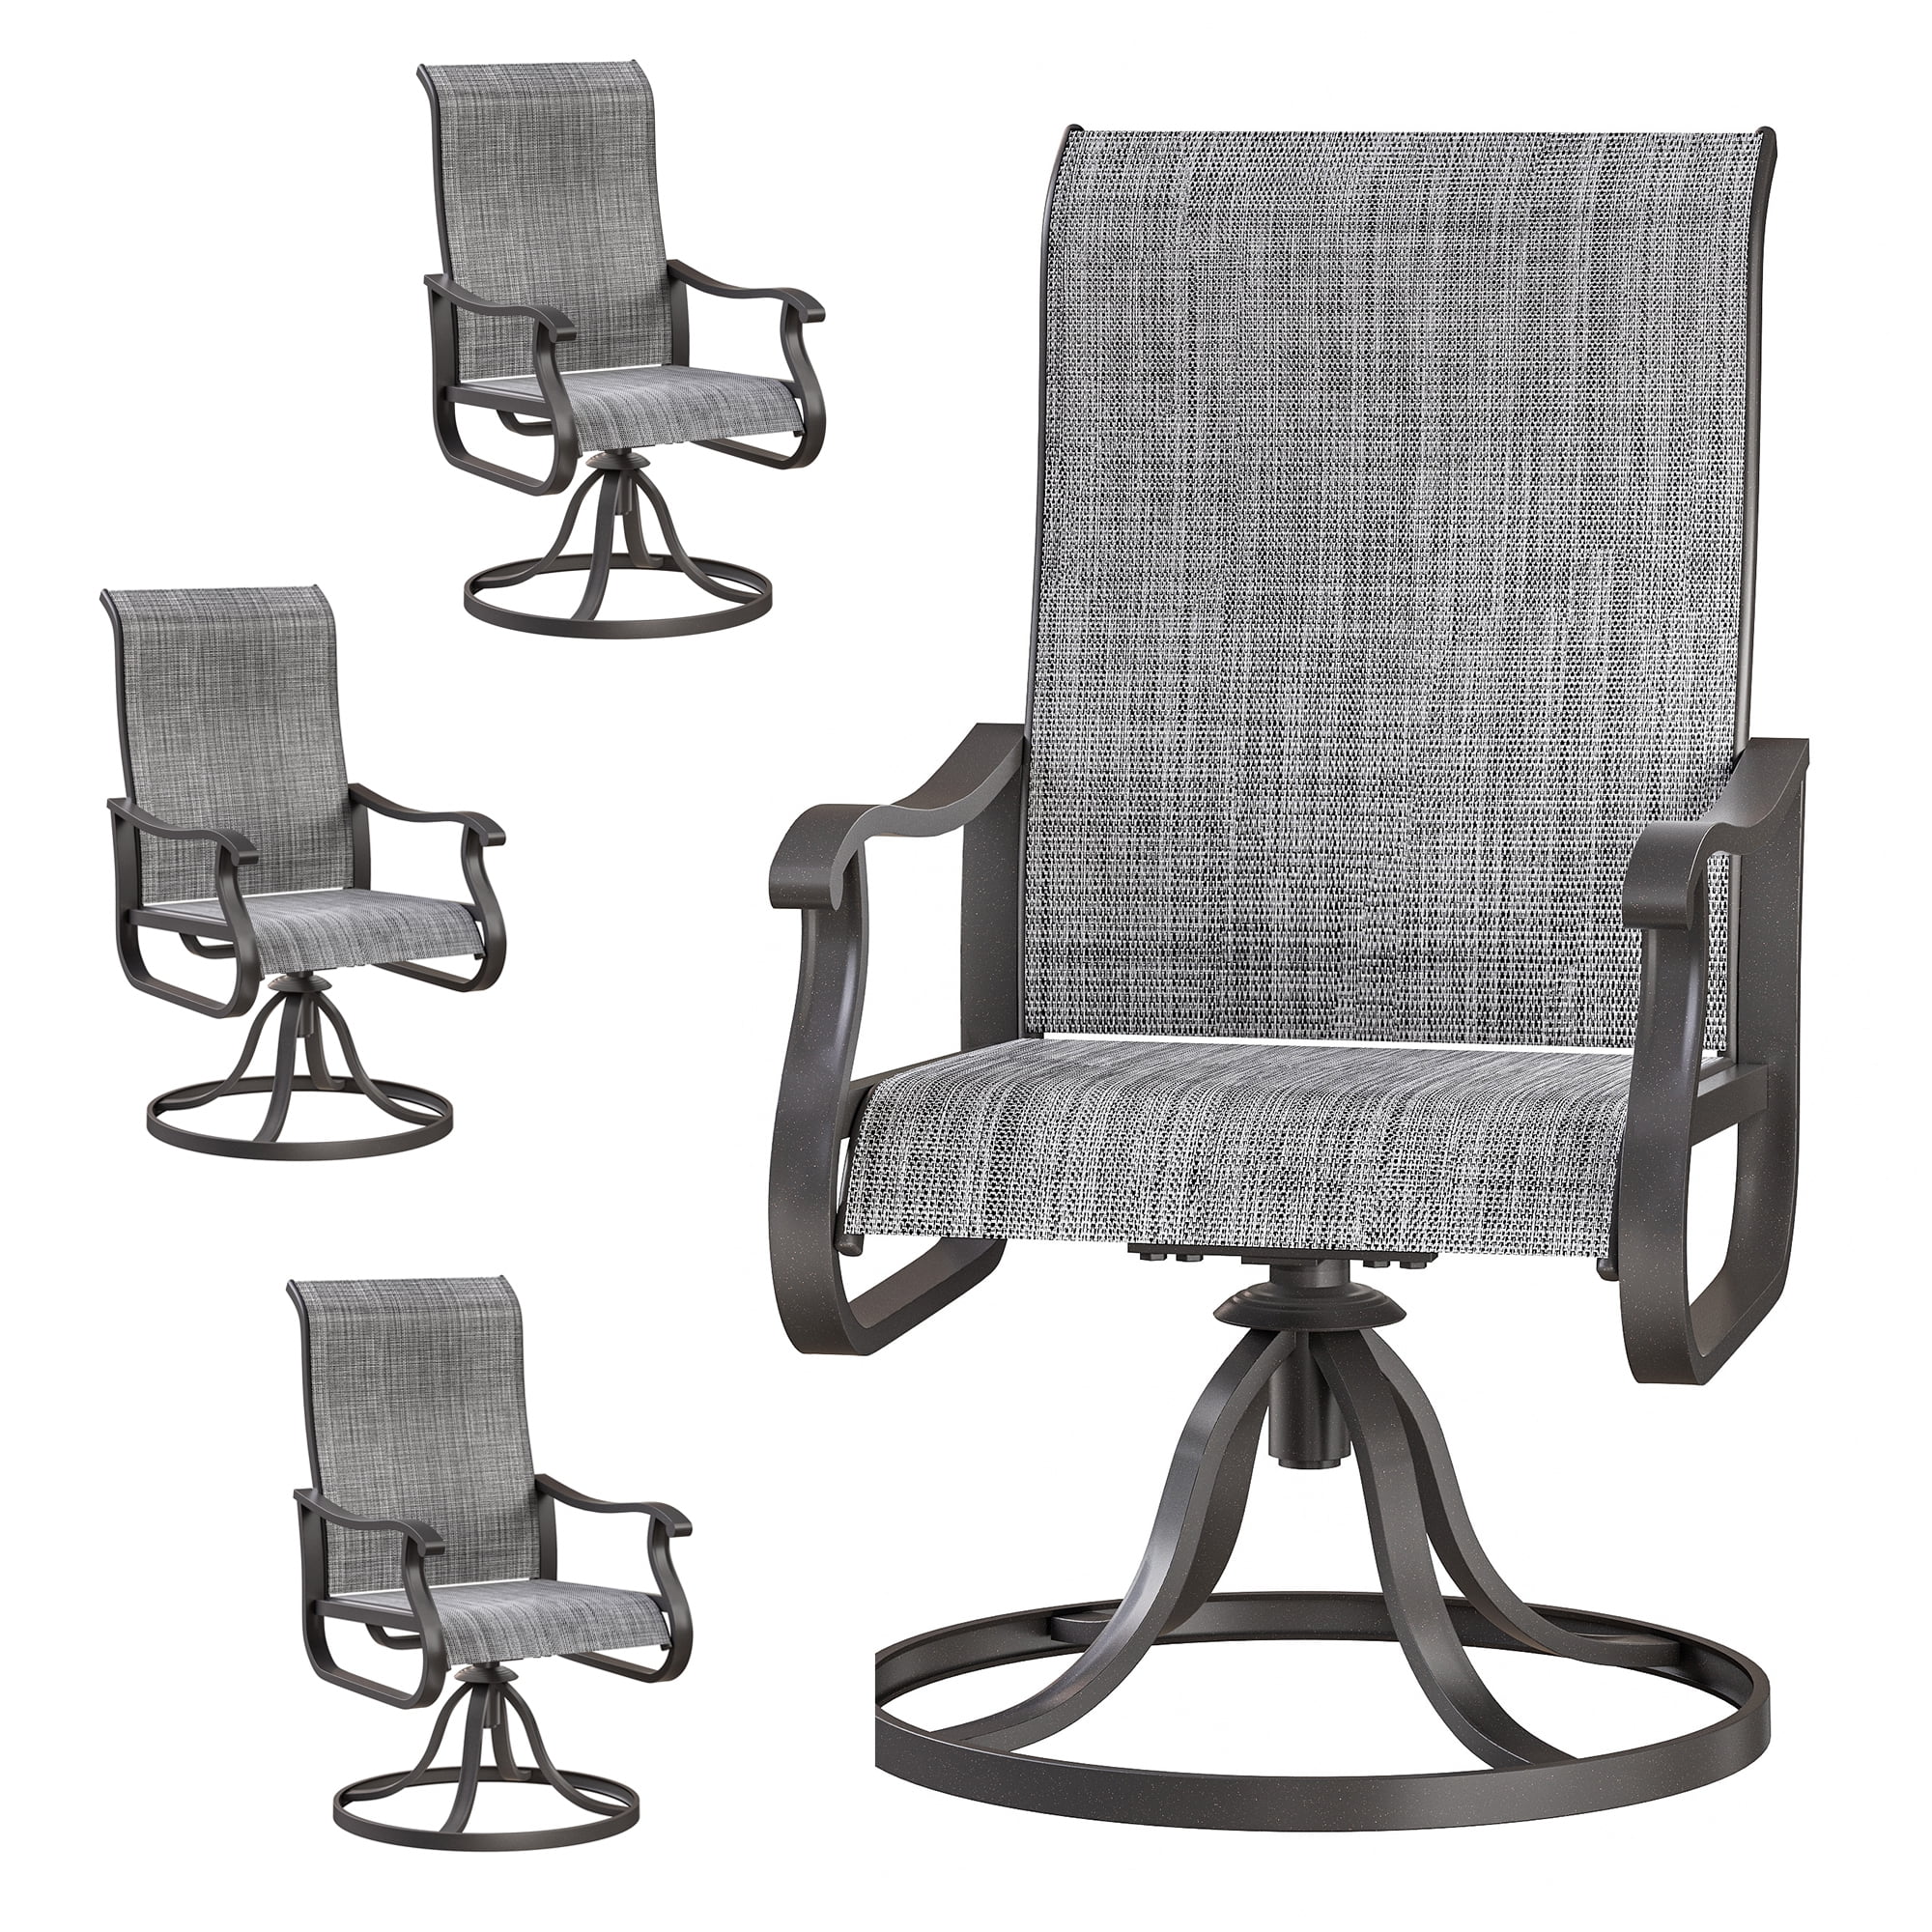 ELPOSUN Patio Swivel Chairs Set of 4, Outdoor Dining Chairs High Back ...